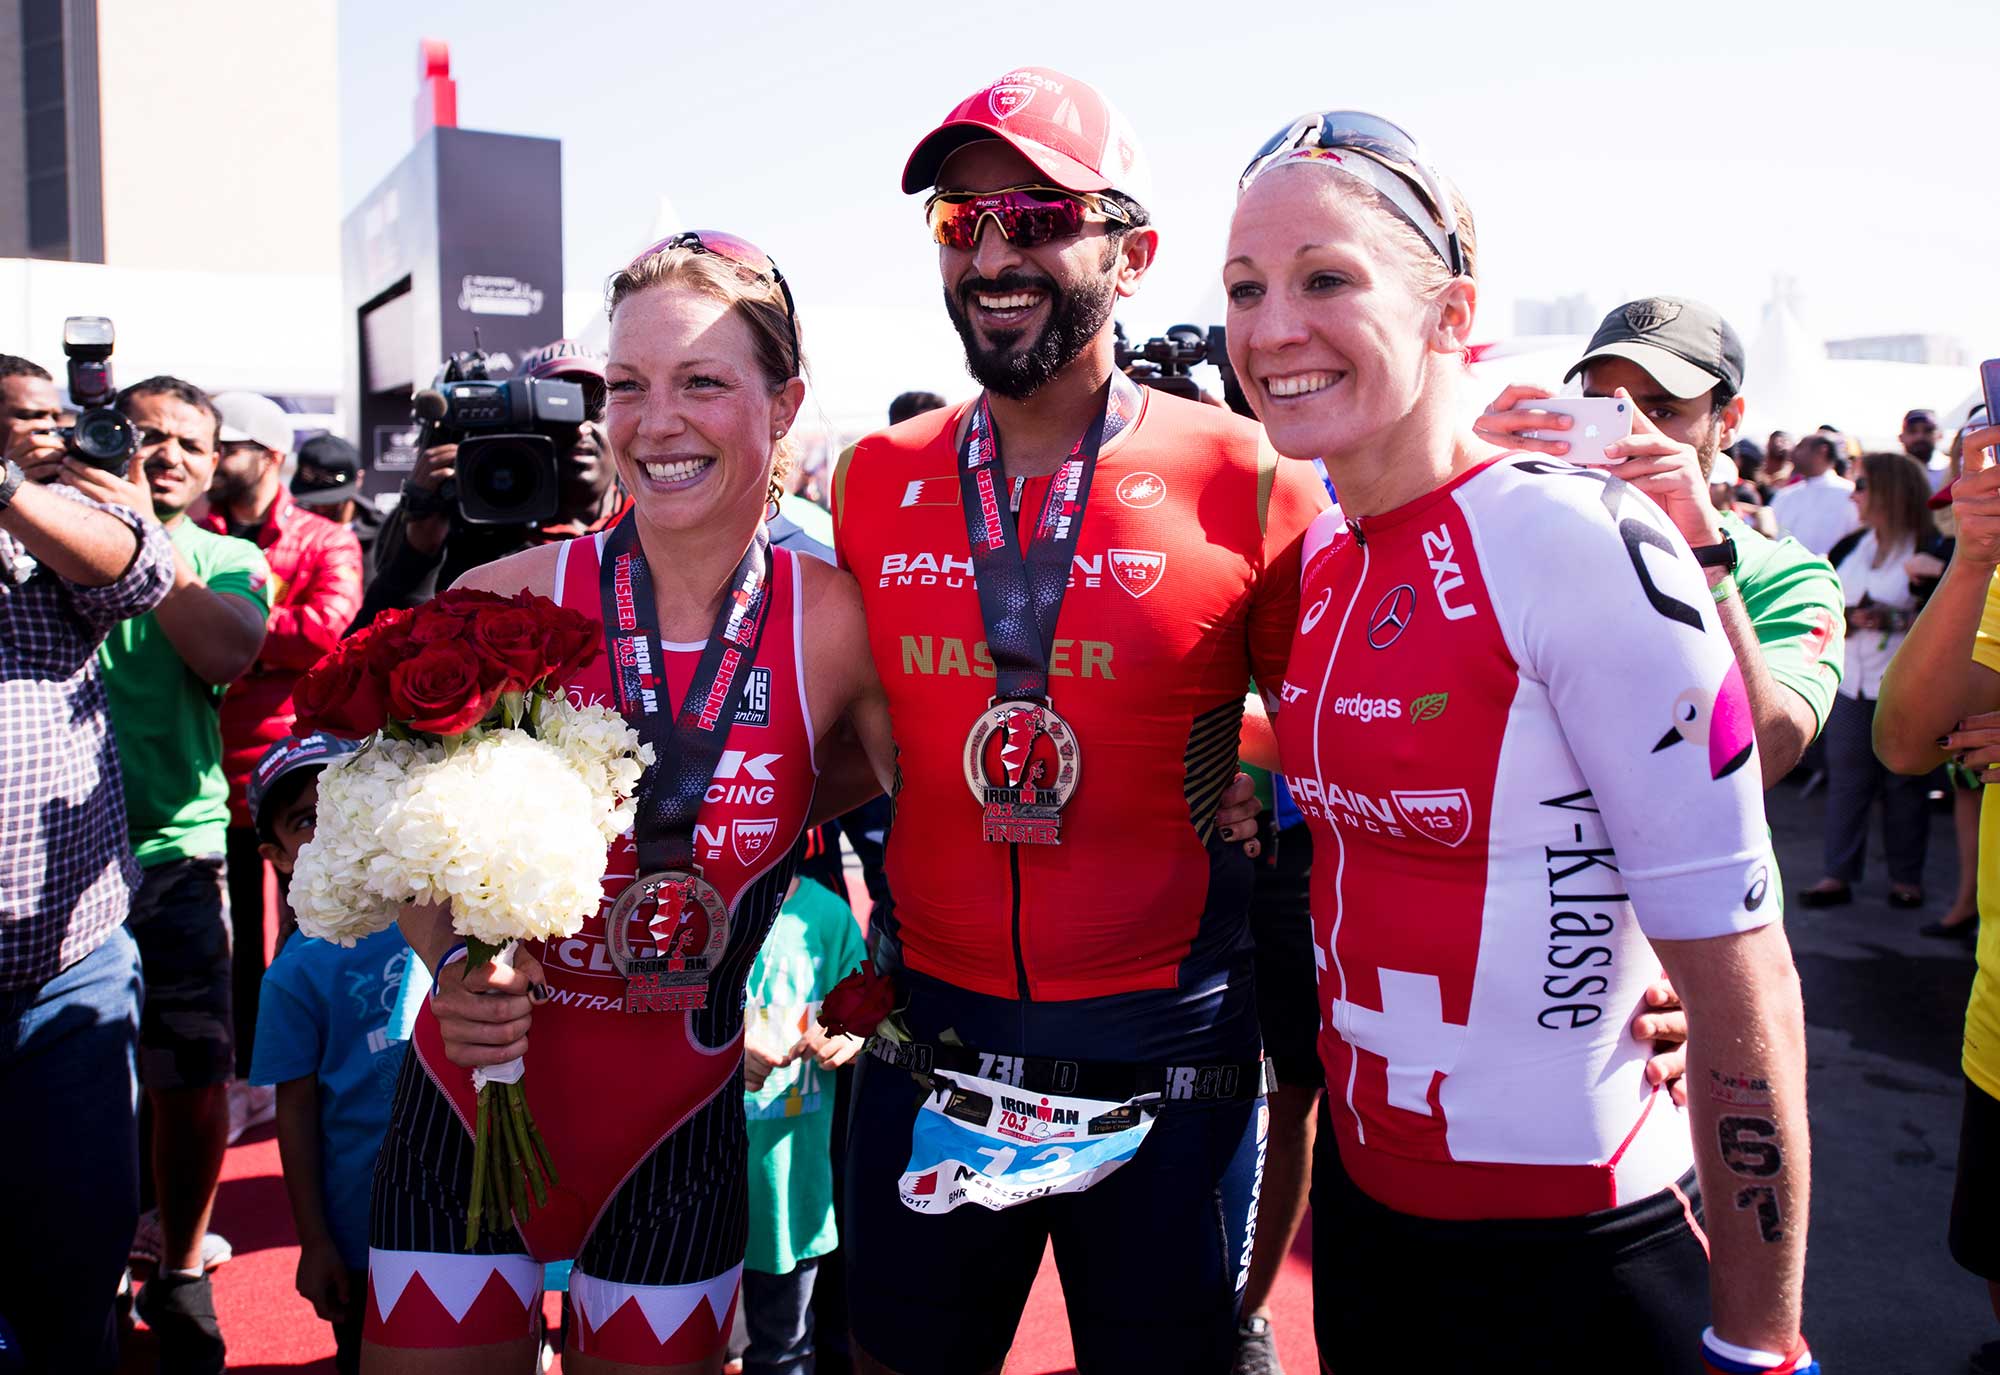 In pictures Ironman 70.3 middle east championship Bahrain